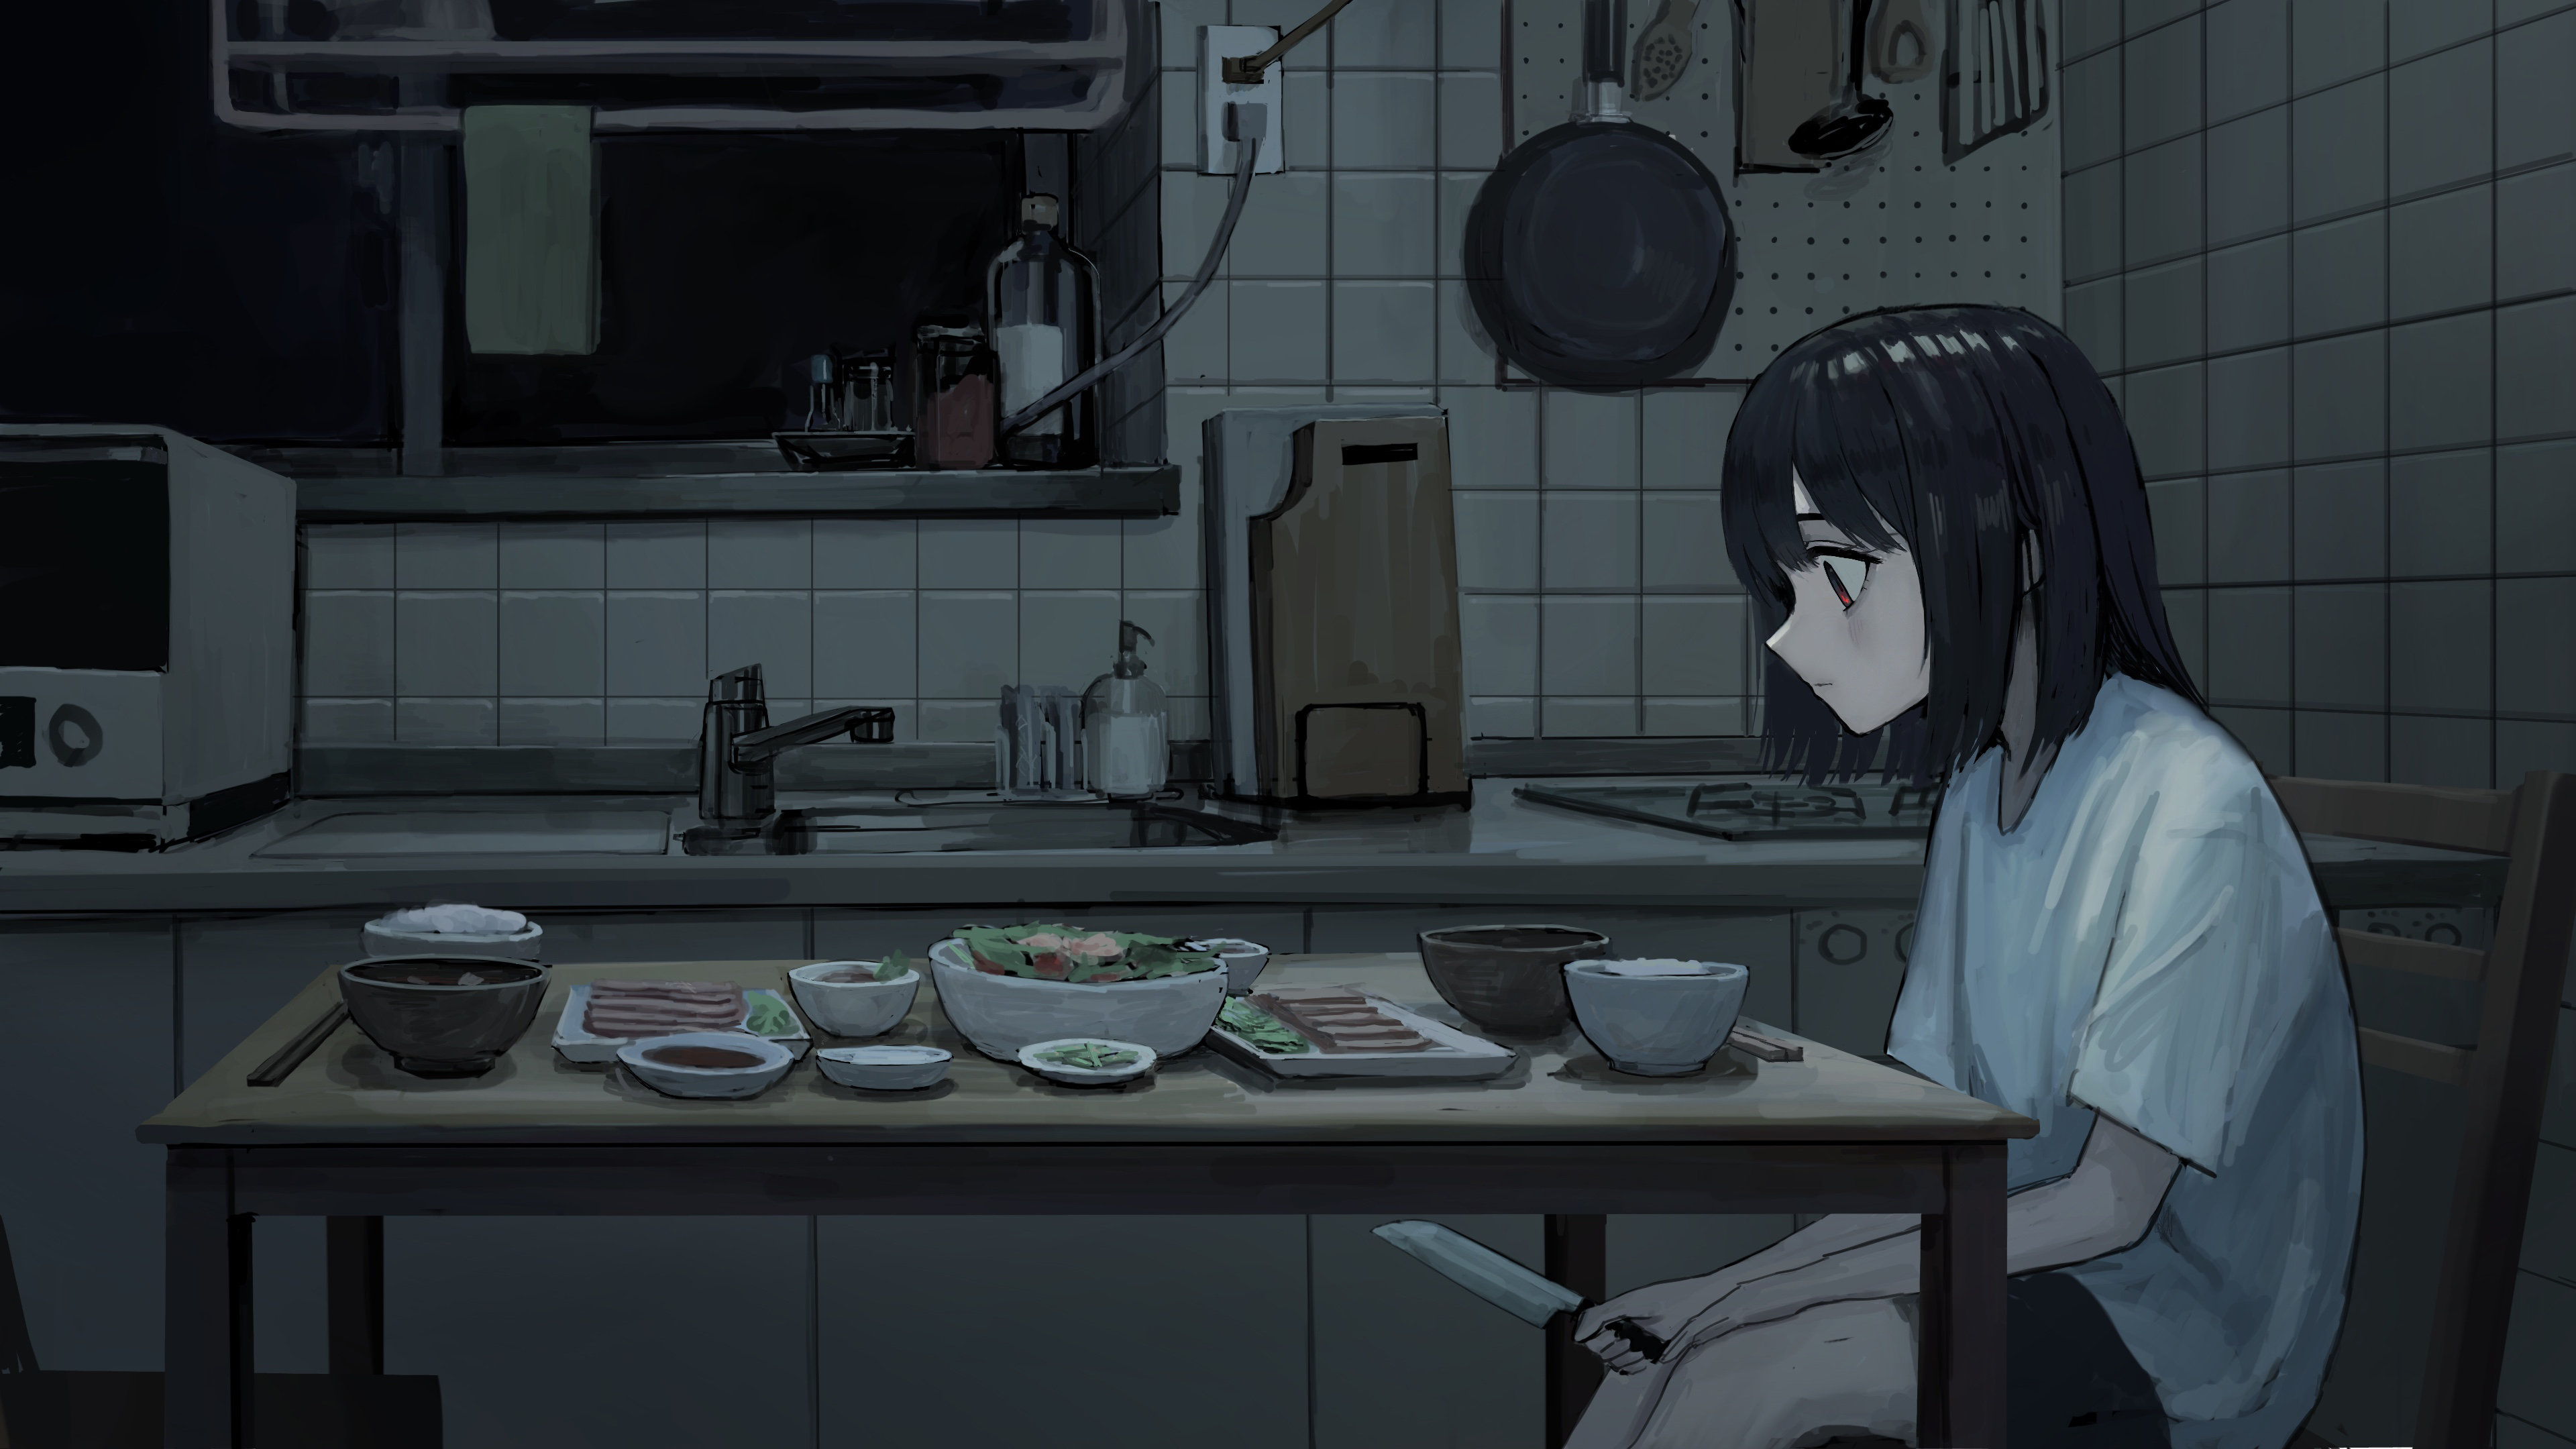 Anime 3840x2160 anime girls depressing eating thinking kitchen knife interior food table chair